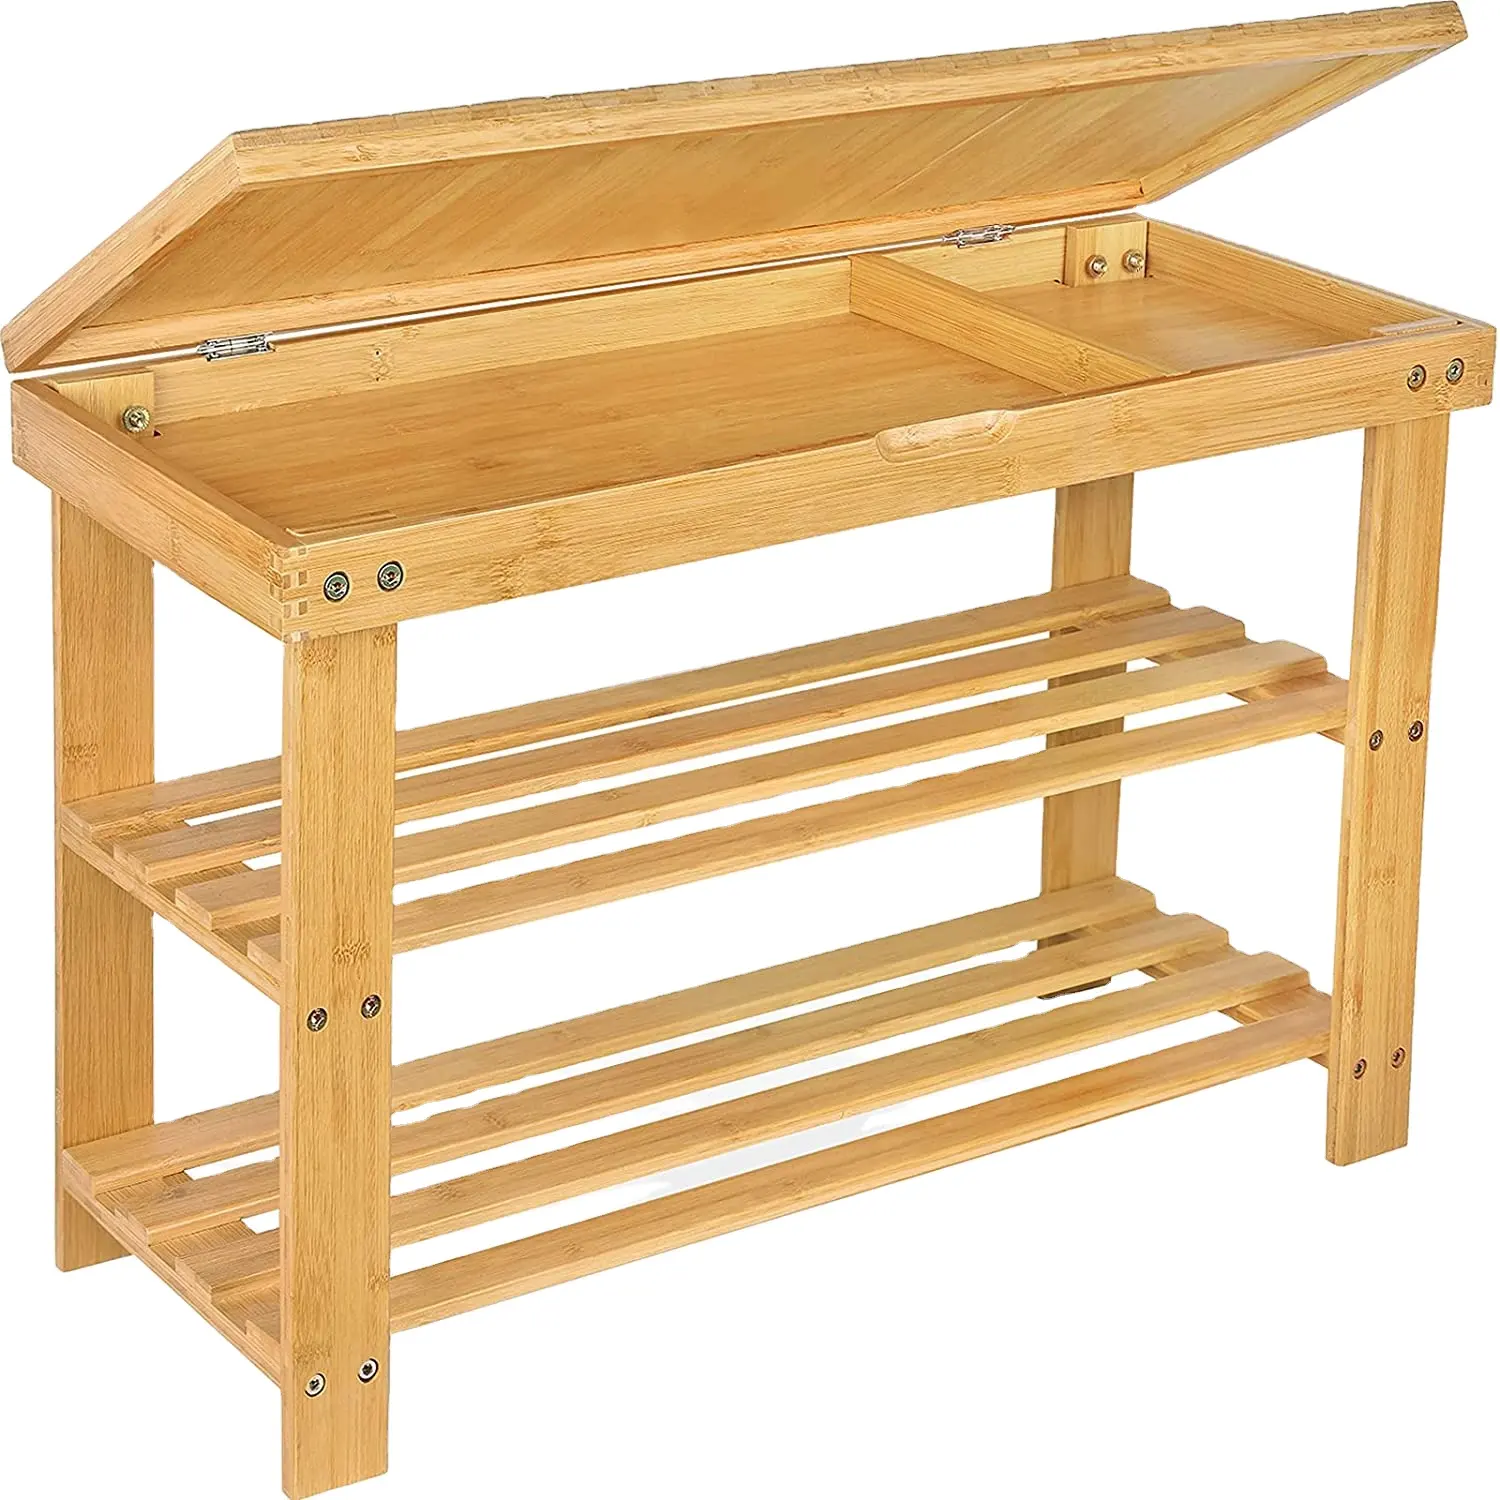 New Product Environmental Friendly Natural Color 3 Tier Bamboo Shoe Rack With Storage Drawer